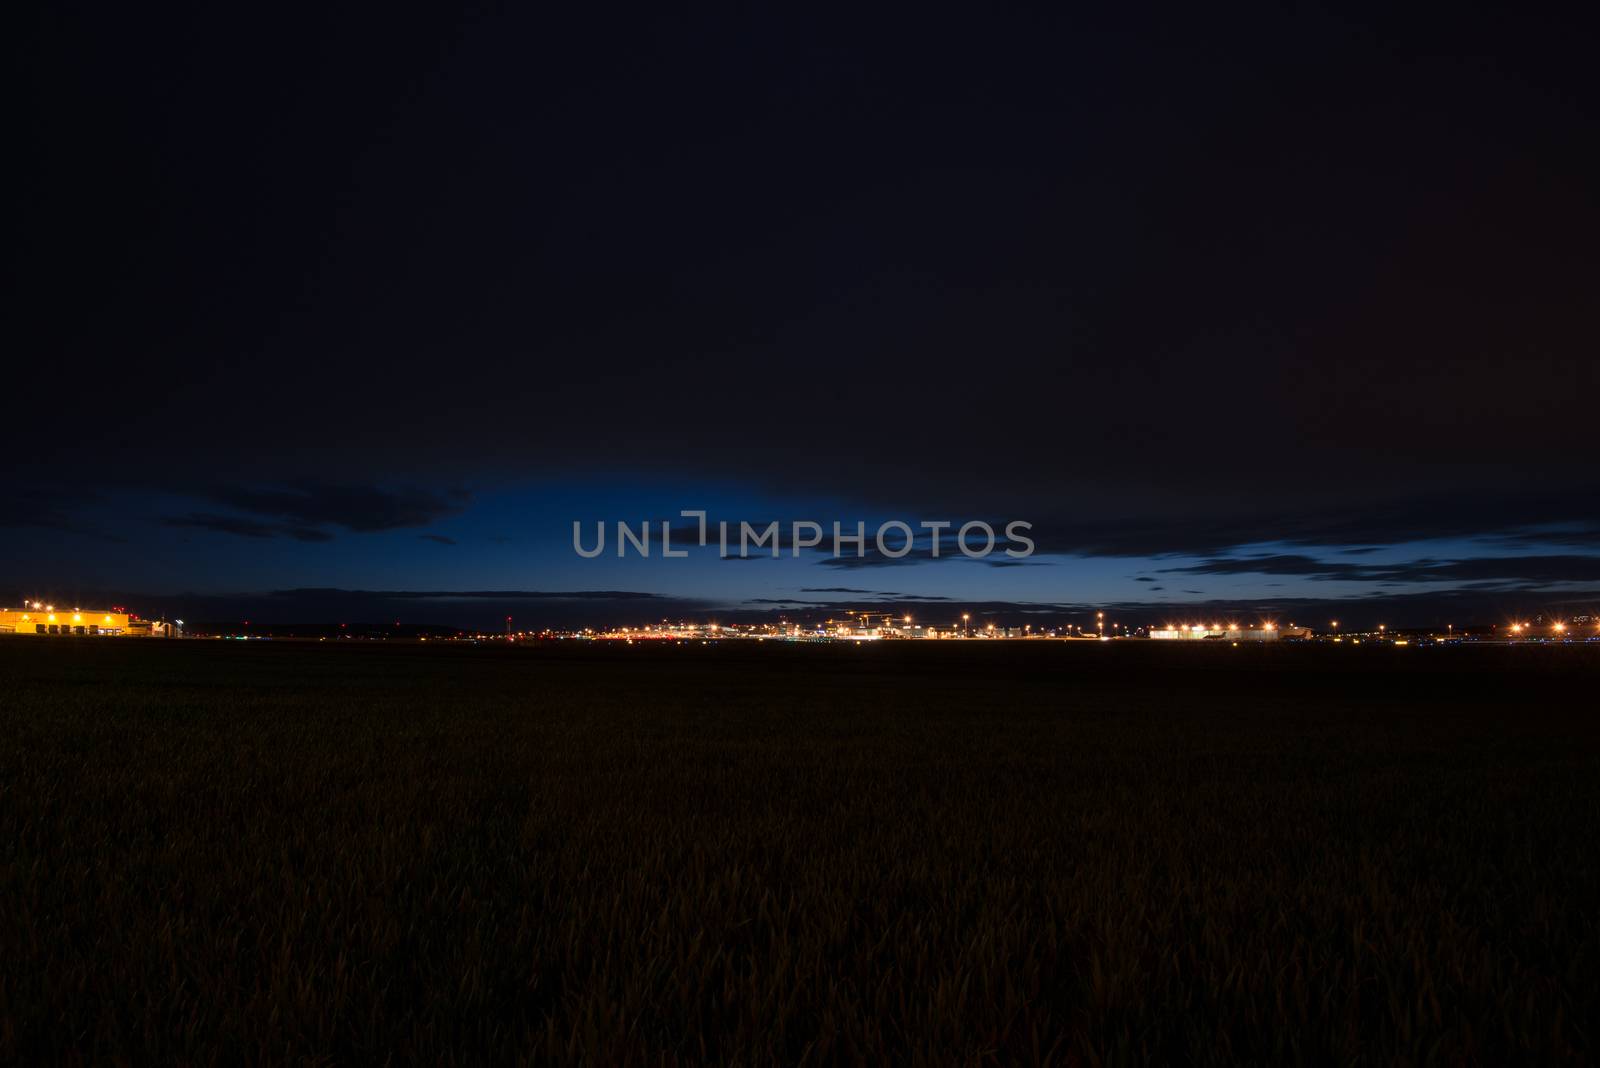 STUTTGART, GERMANY - MAY 6, 2014: Extreme wide angle shot of Stuttgart Airport at dusk with planes departing and arriving as seen from over the fields on May, 6, 2014 in Stuttgart, Germany. Stuttgart Airport is the 6th biggest airport in Germany, having a capacity of 14 million people per year.